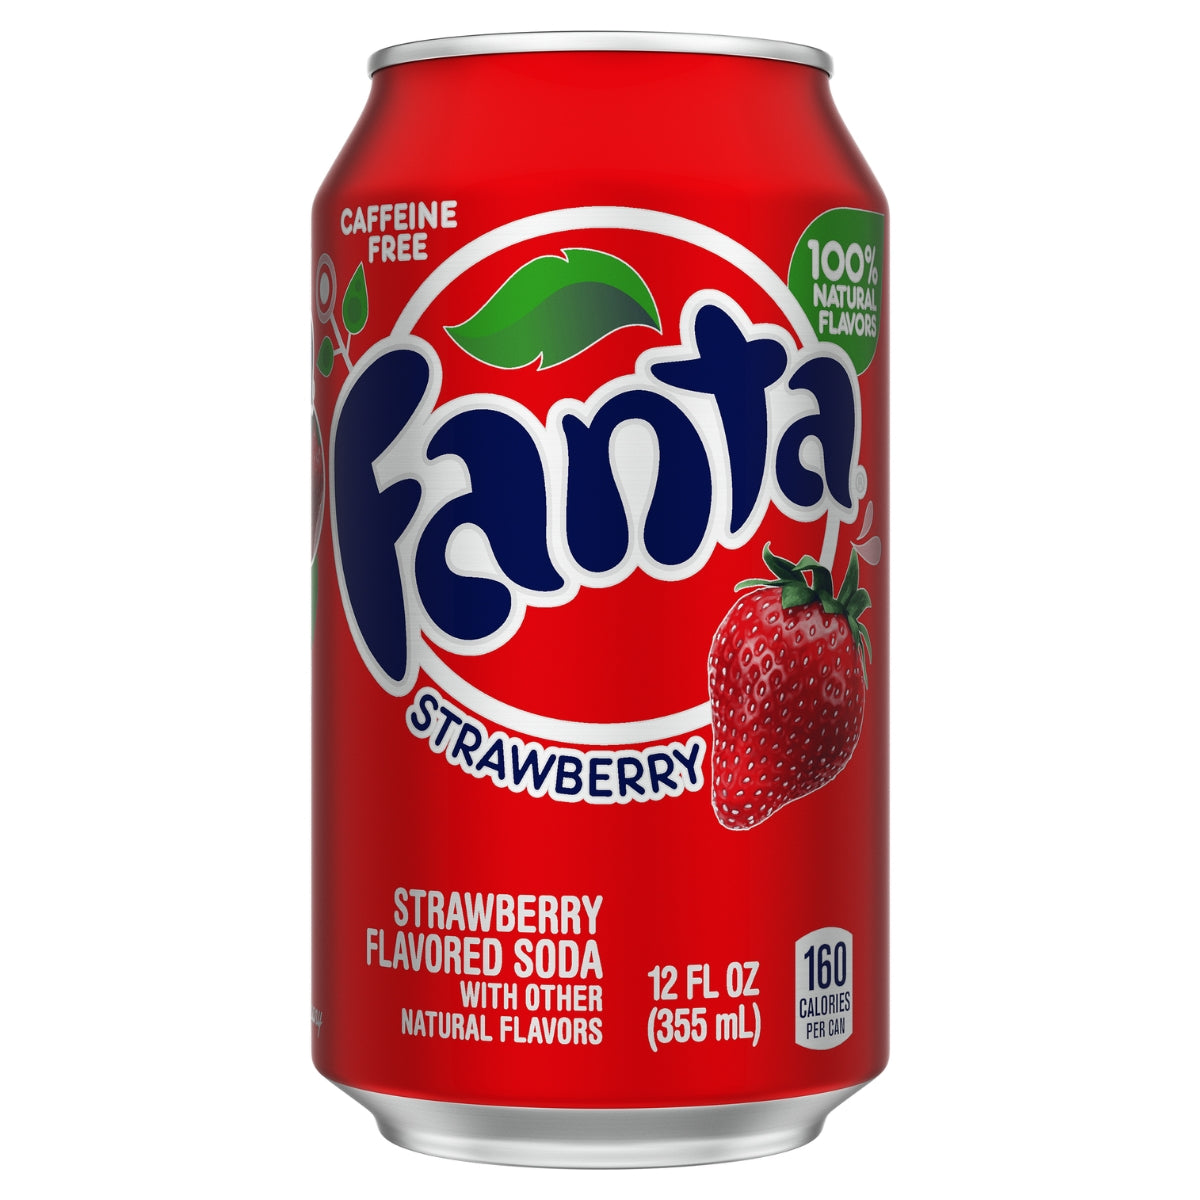 A can of Fanta - Strawberry - 330ml on a white background.